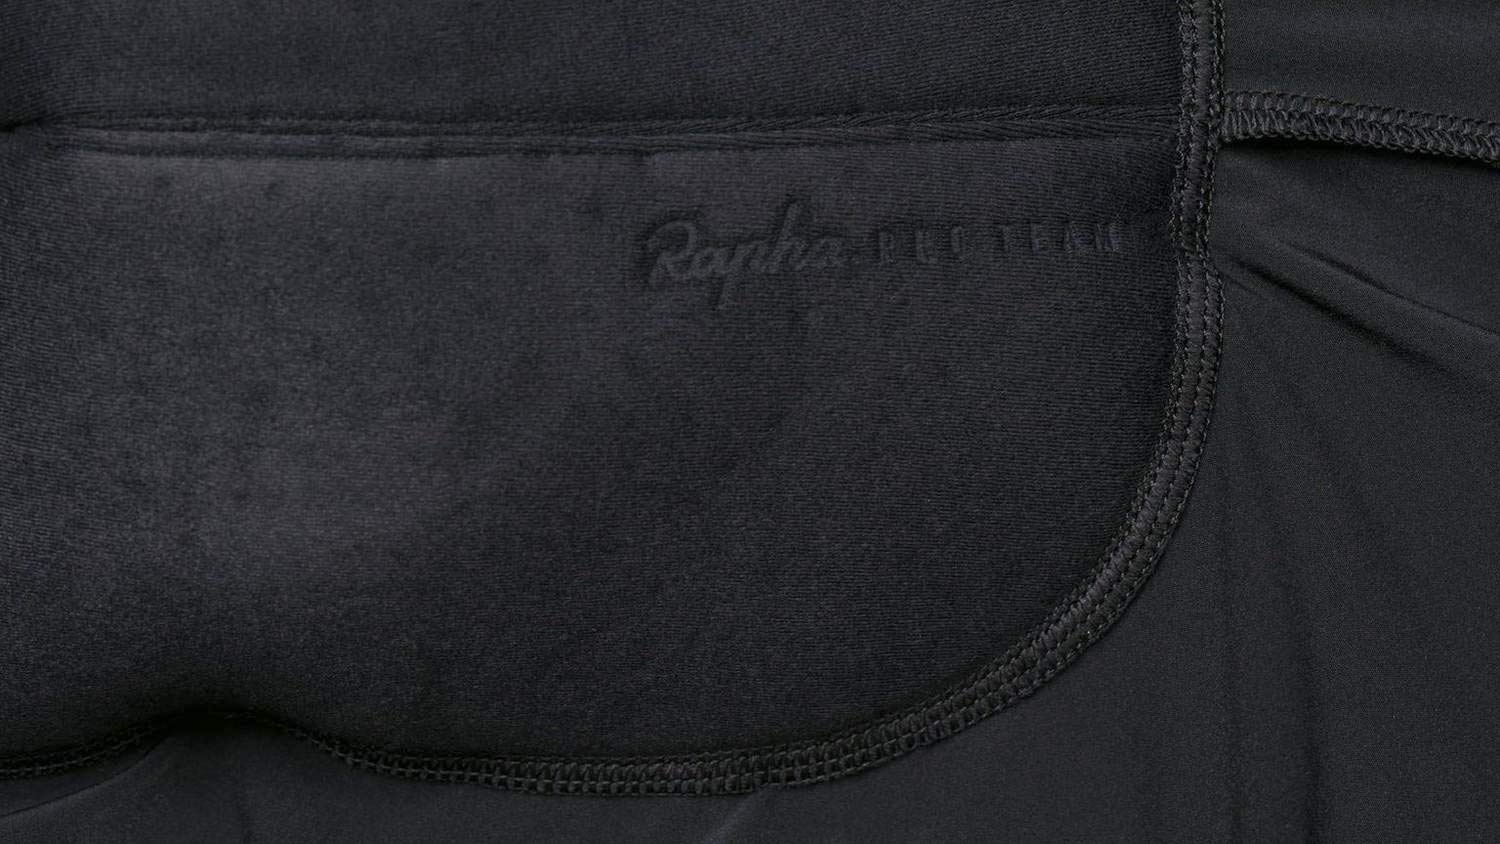 Rapha Pro Team Powerweave Bib Shorts, pro-level woven lightweaight breathable structured road cycling shorts jacquard weave